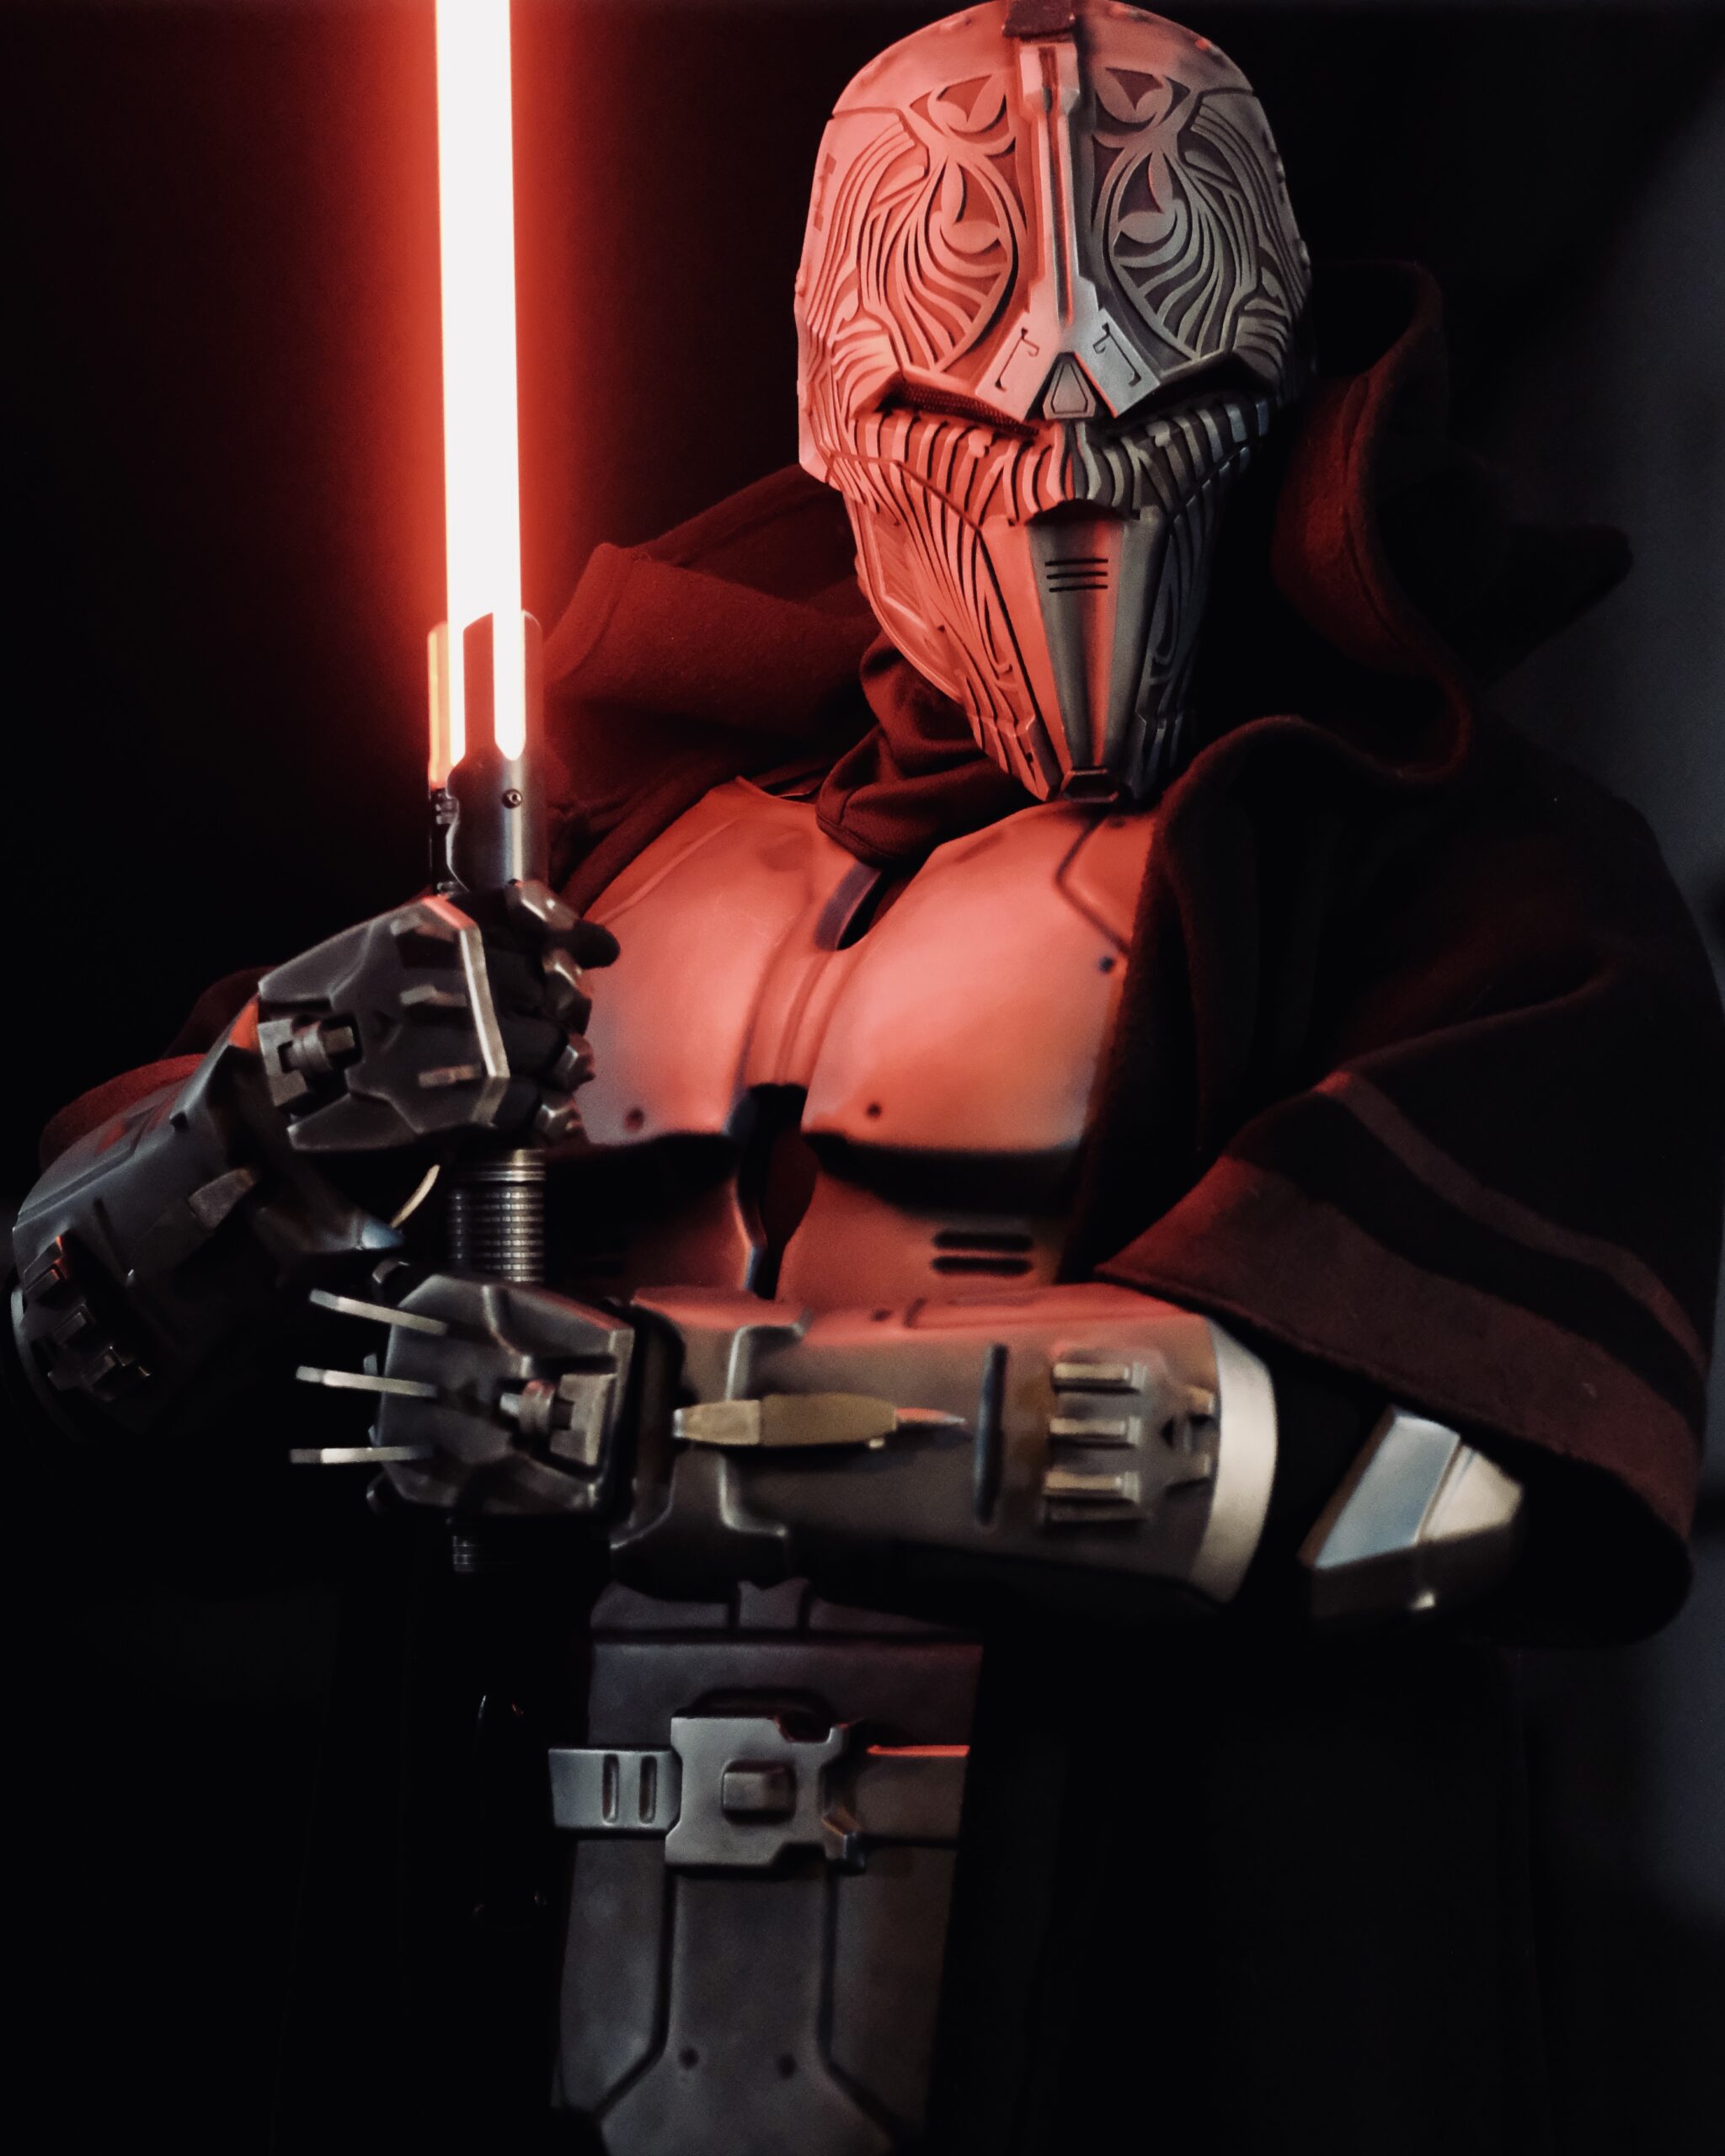 Sith Eradicator cosplay by Emmanuel Denier | Photographed by Florian Ulrich